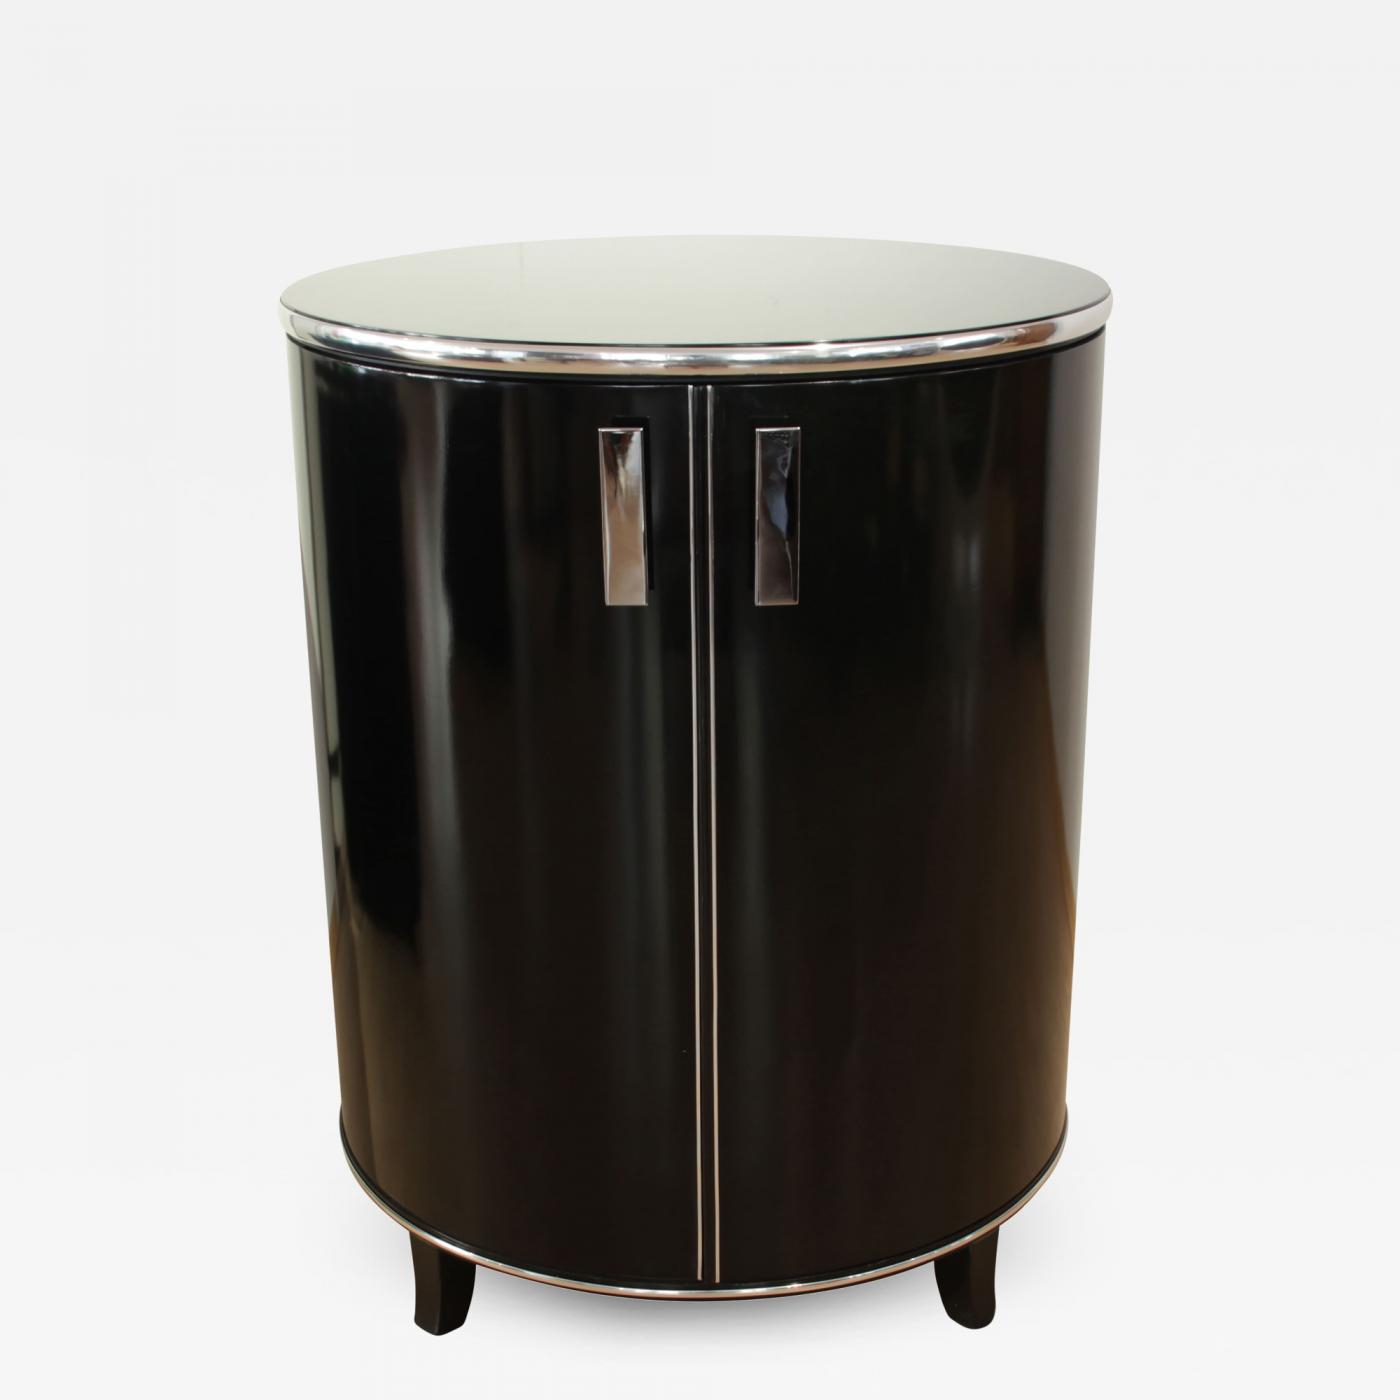 Round Art Deco Bar Cabinet Black Polished England Circa 1940 intended for sizing 1400 X 1400